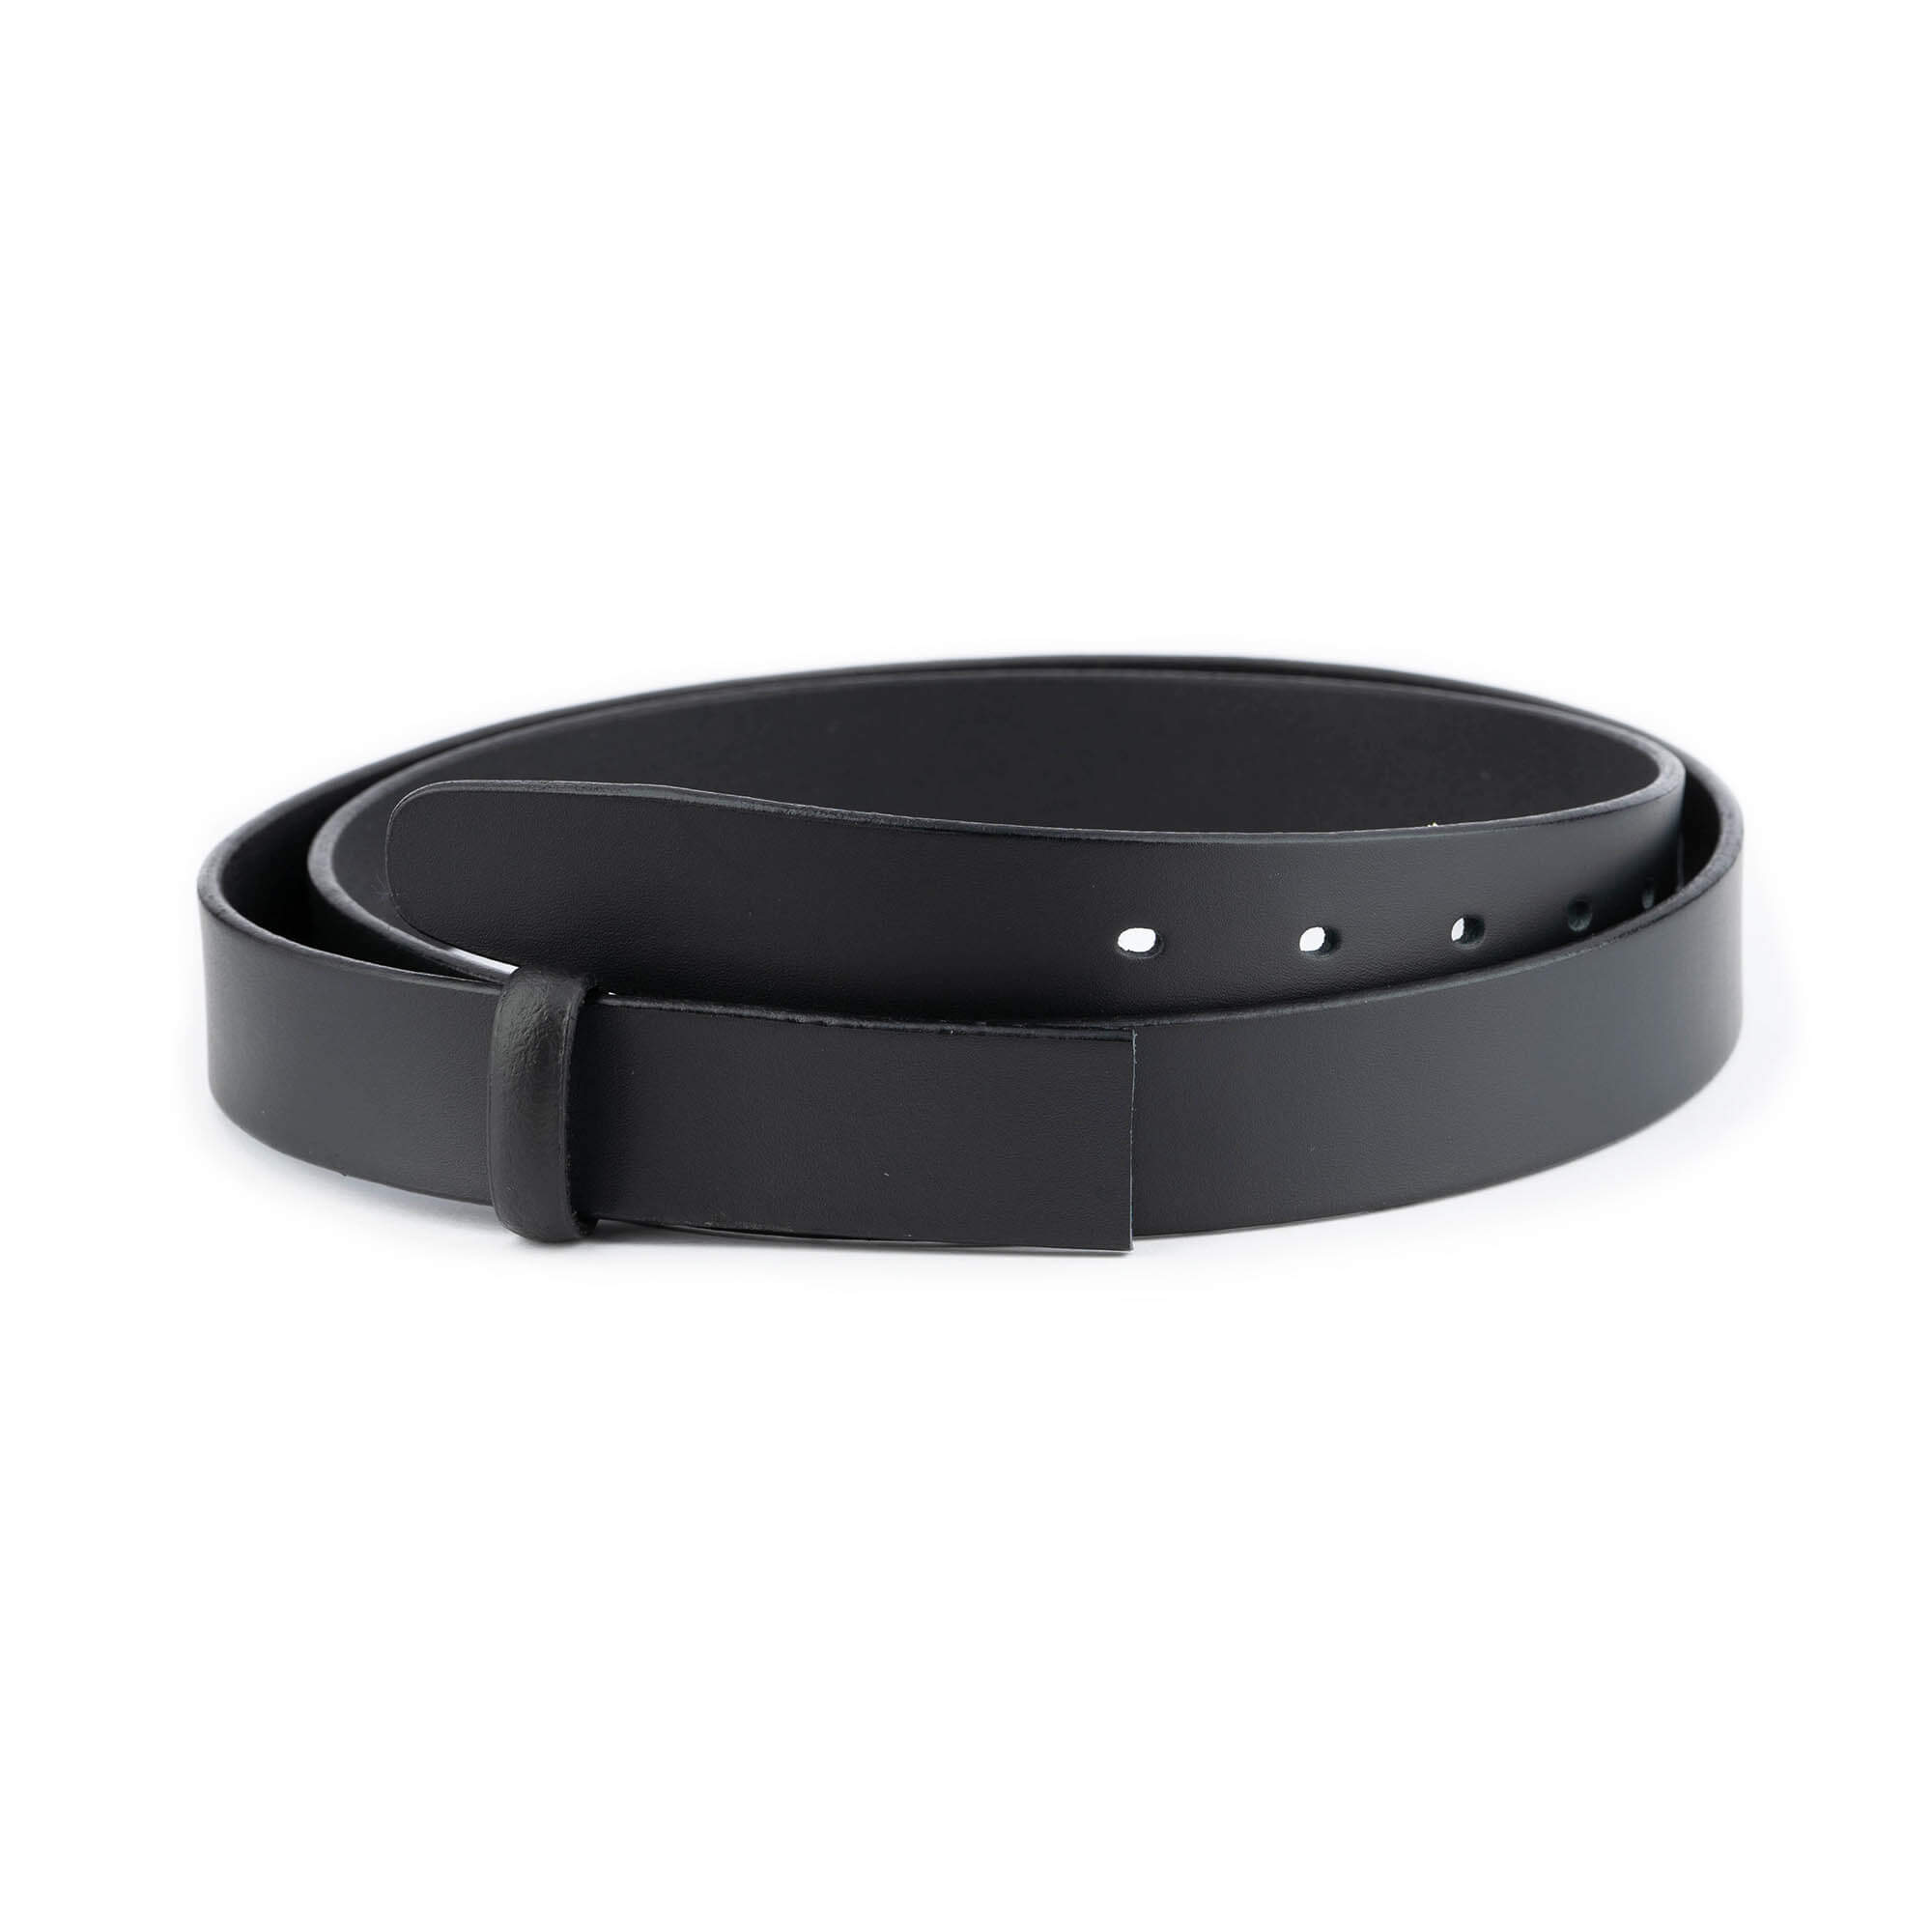 Buy Replacement Black Leather Strap For Belt 3.0 Cm